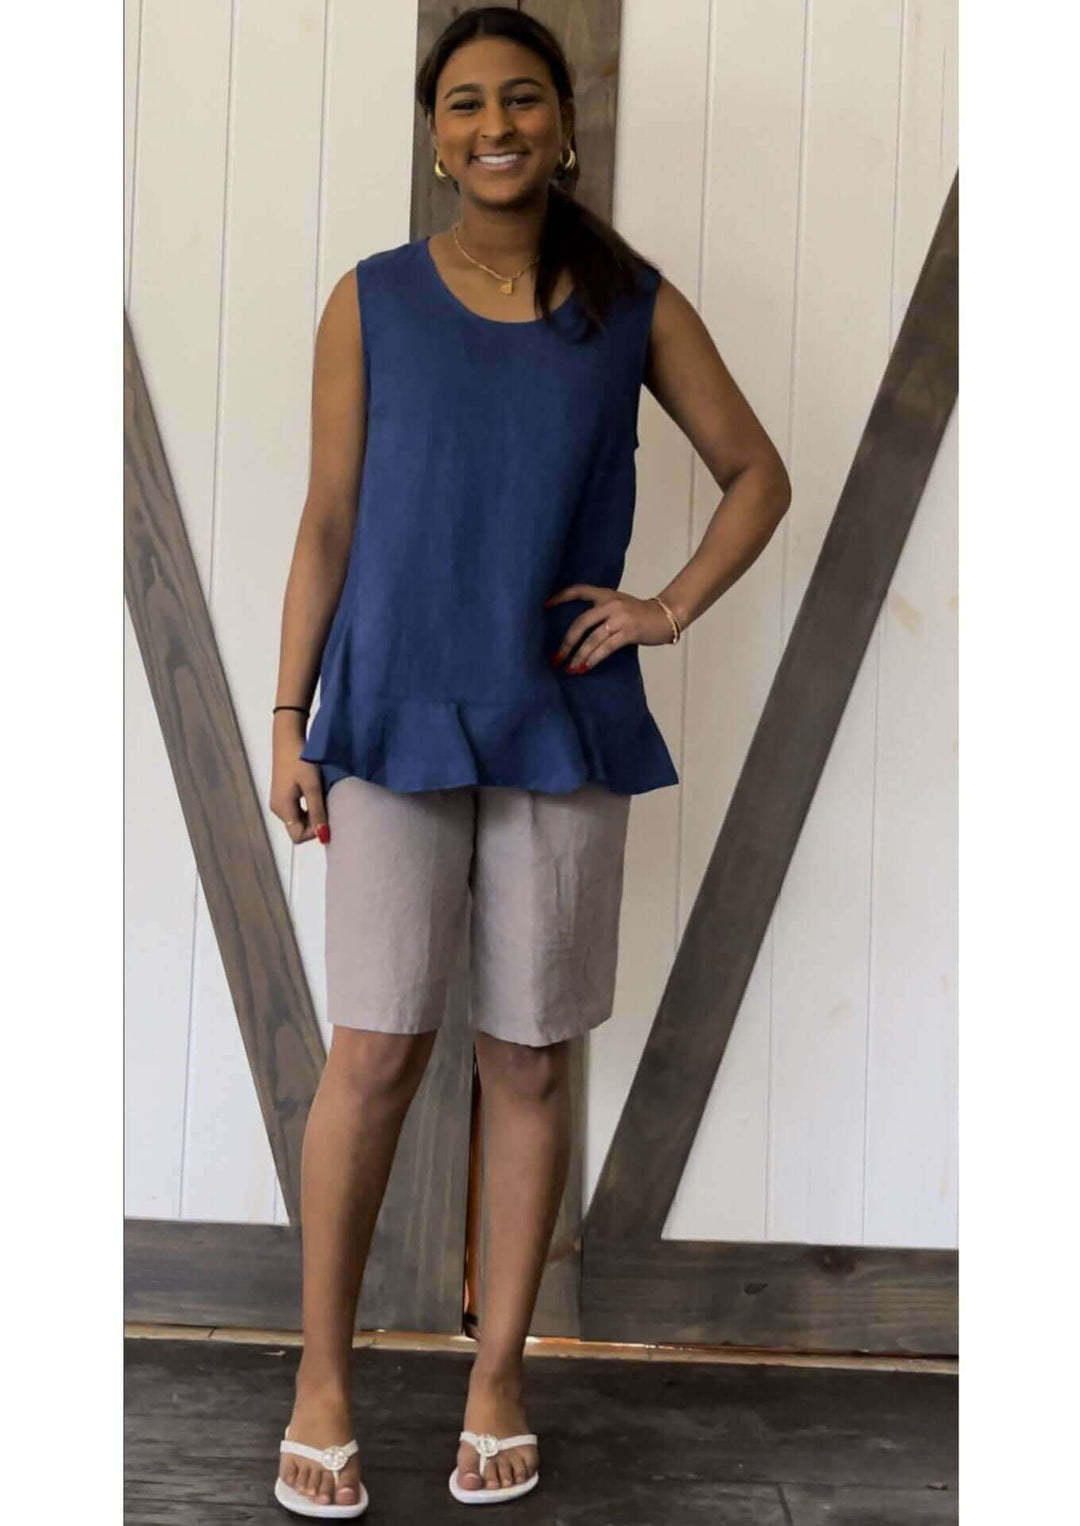 USA Made 100% Linen French Blue Ladies Sleeveless Tunic with Flounce Ruffle Hem | Match Point Style HLT560 | Classy Cozy Cool Women's Made in America Boutique